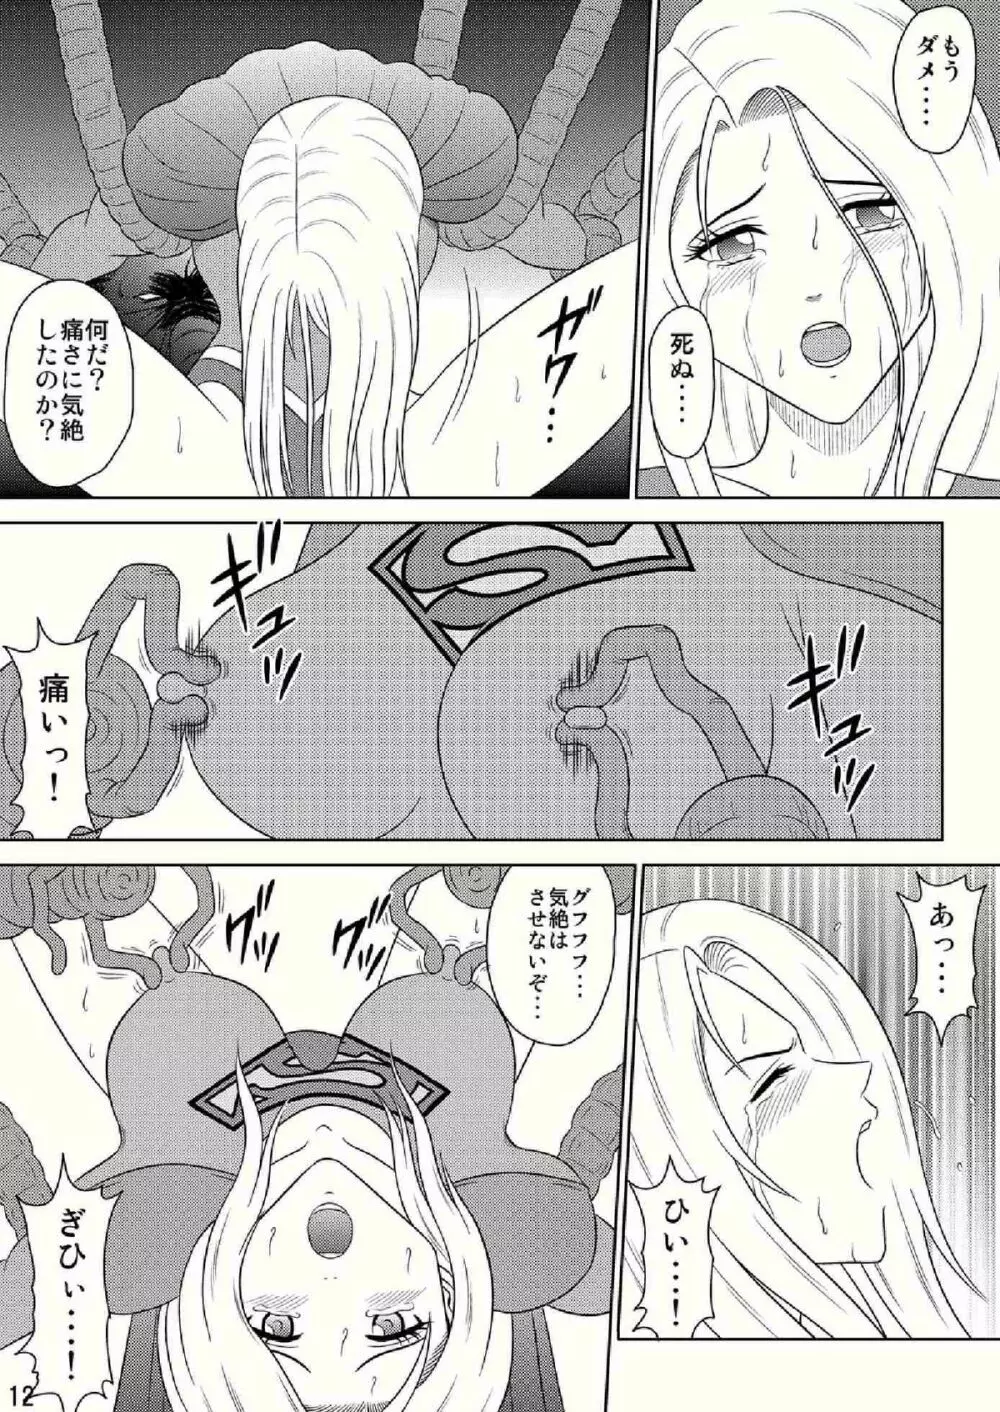 Toukikoubou vol.2 SUPER GIRL - Humiliation and Execution - Page.12